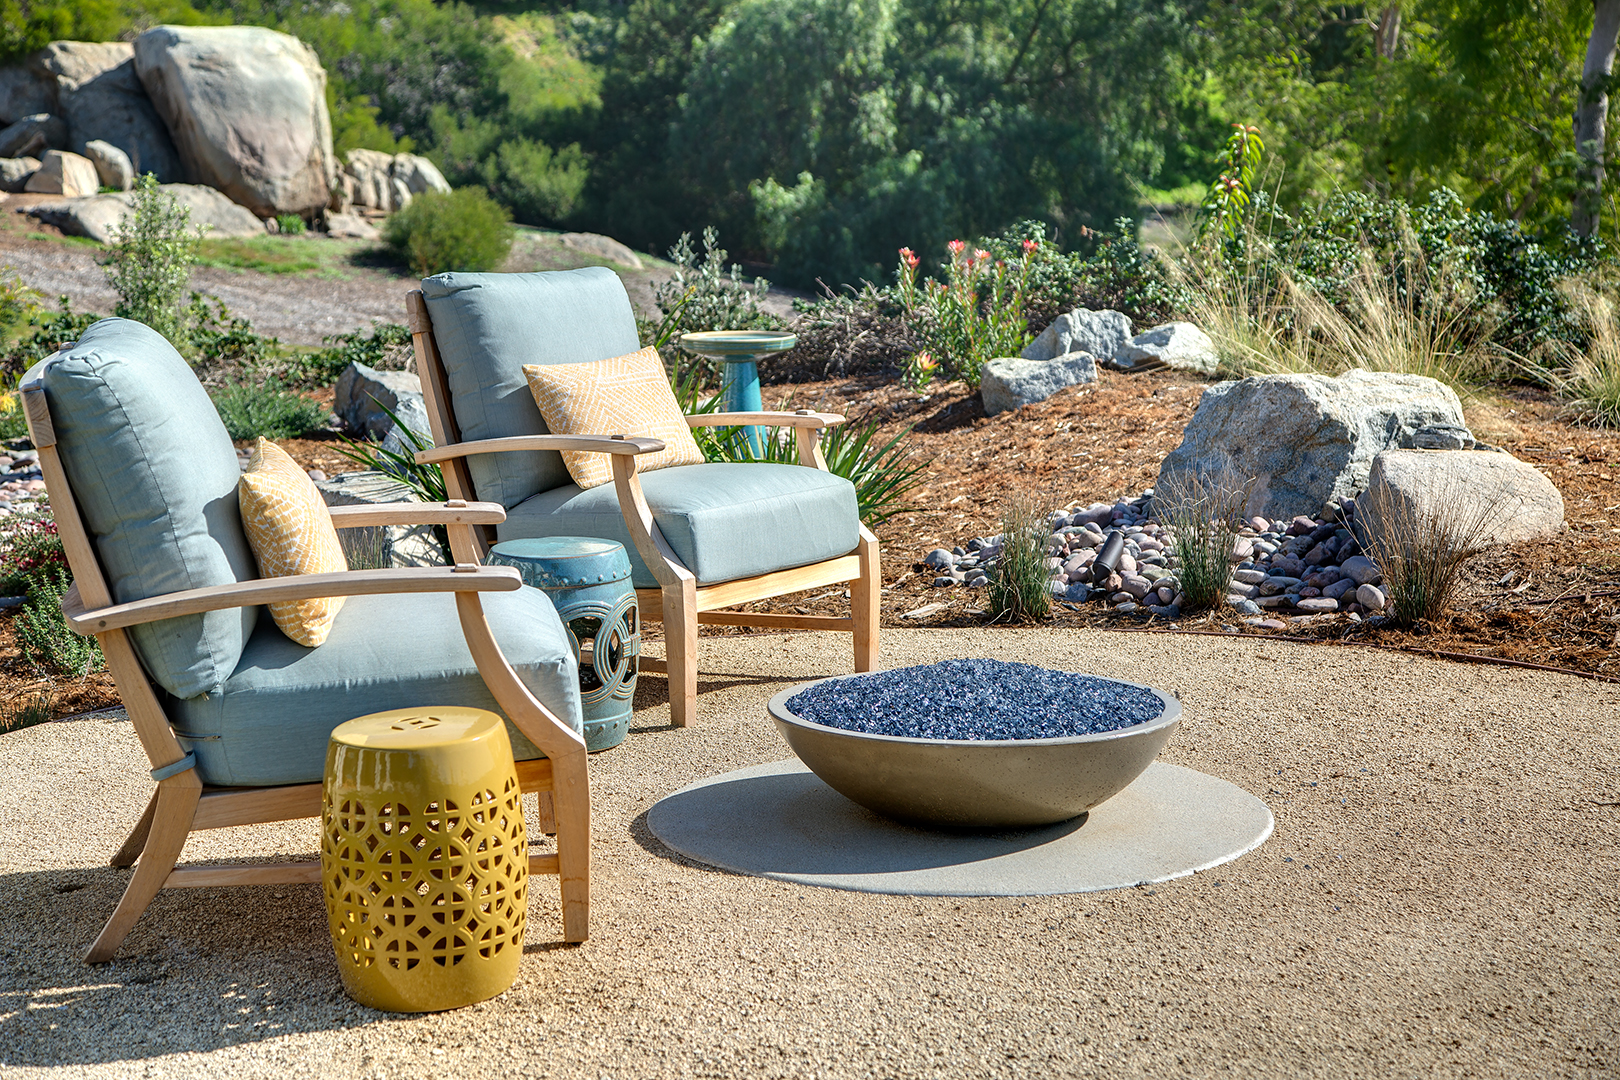 There are some key elements that can help make any outdoor space your personal sanctuary. Of course, there is comfortable and durable outdoor furniture and a beautiful landscape design. Once you have those in place, there are still a few more layers that I want to share that will bring in your style, reflect your personality, and help create a space that you absolutely love.